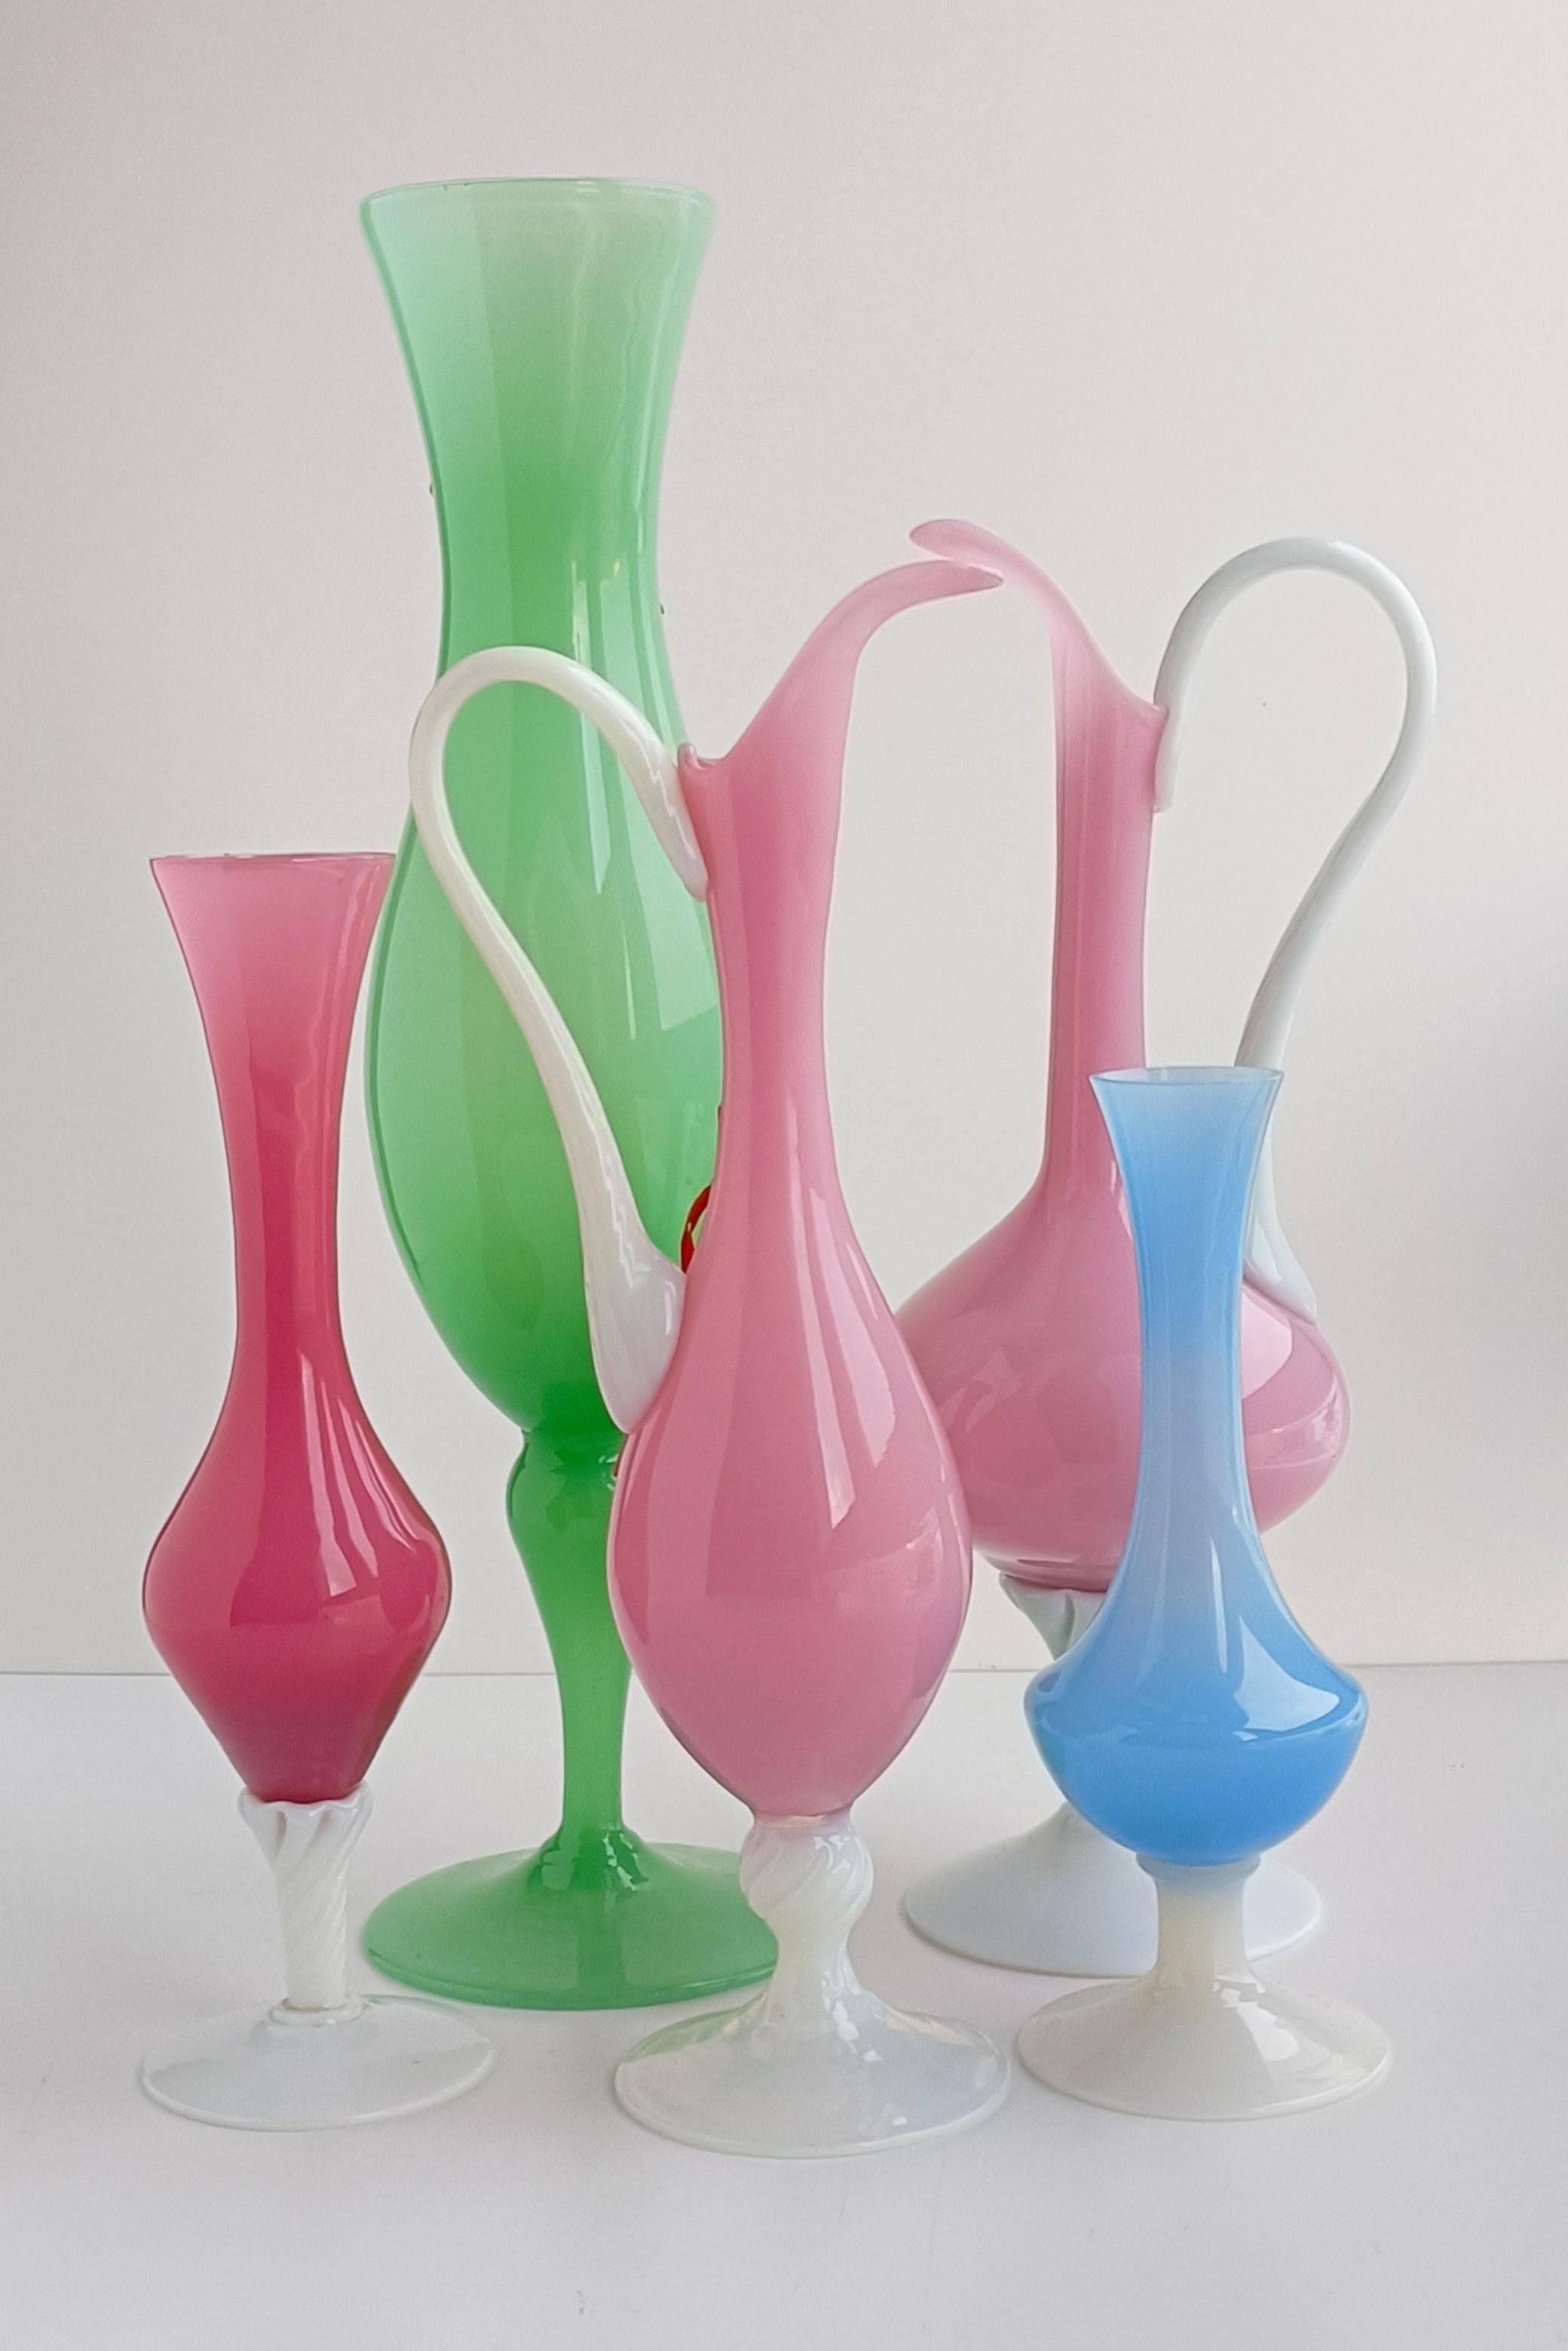 Empoli Glass Opaline Florence Set of Vases, Italy, 1950s.  For Sale 1